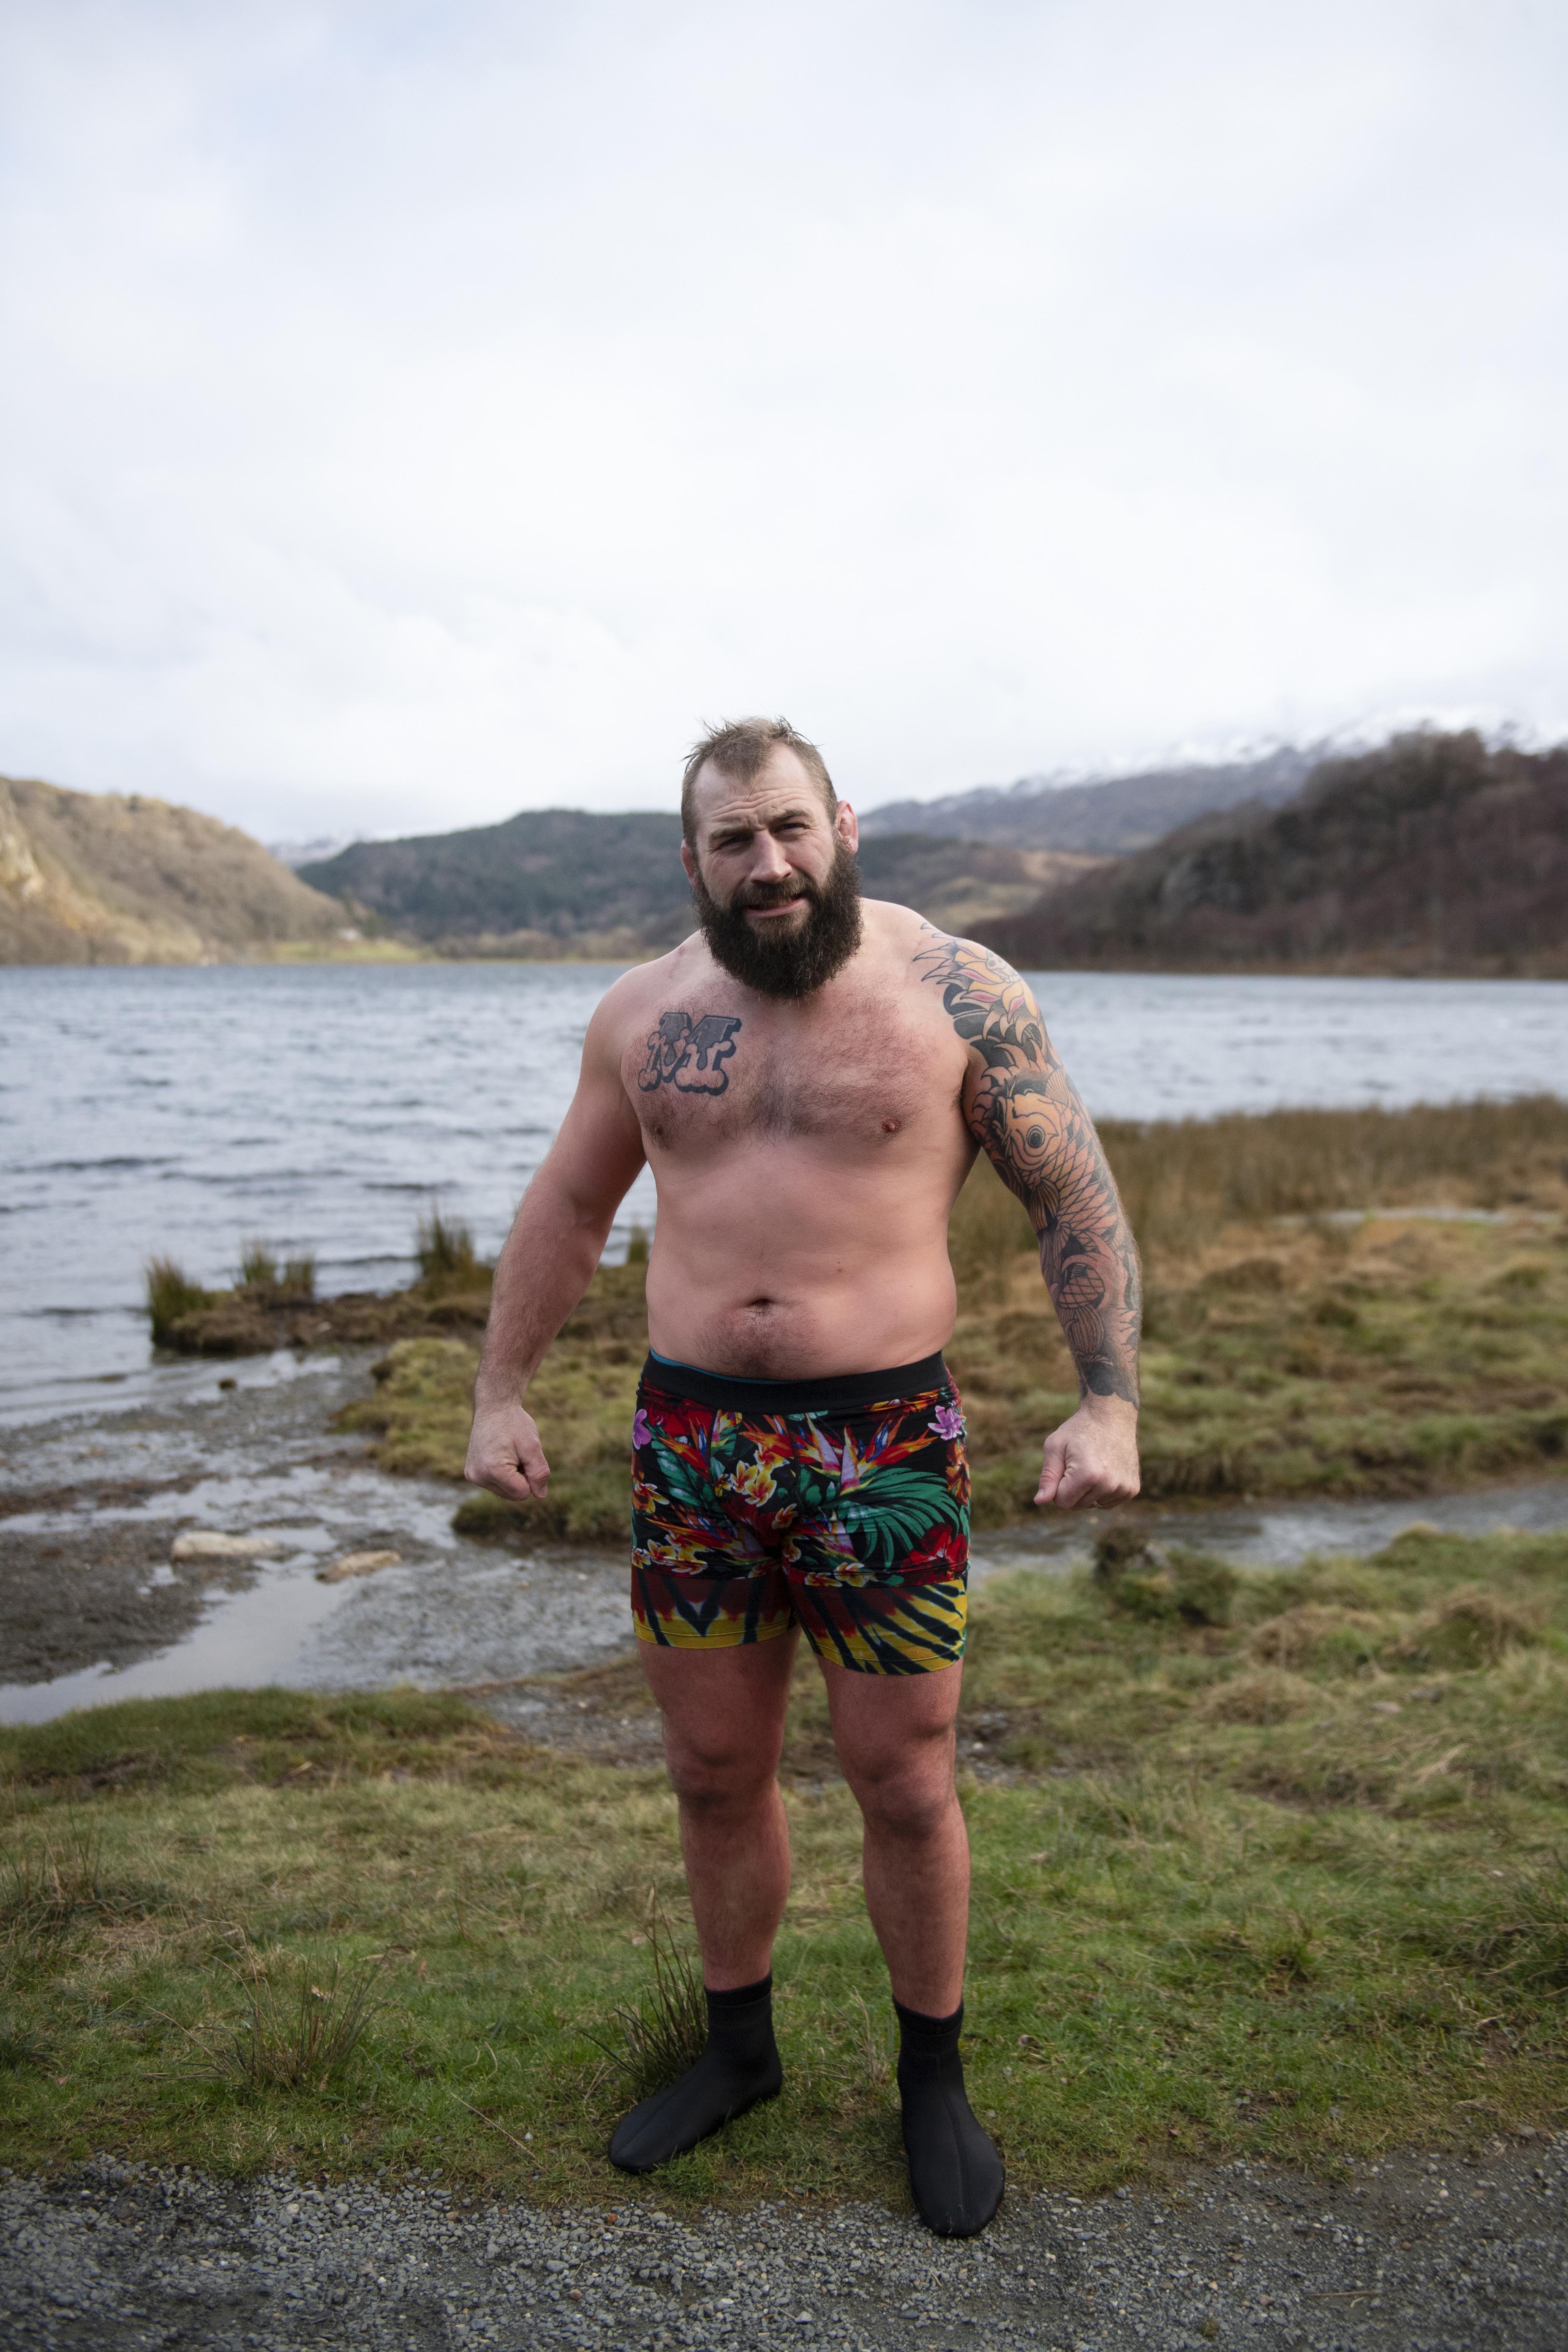 Joe Marler is releasing a documentary on how to copy with mental health issues